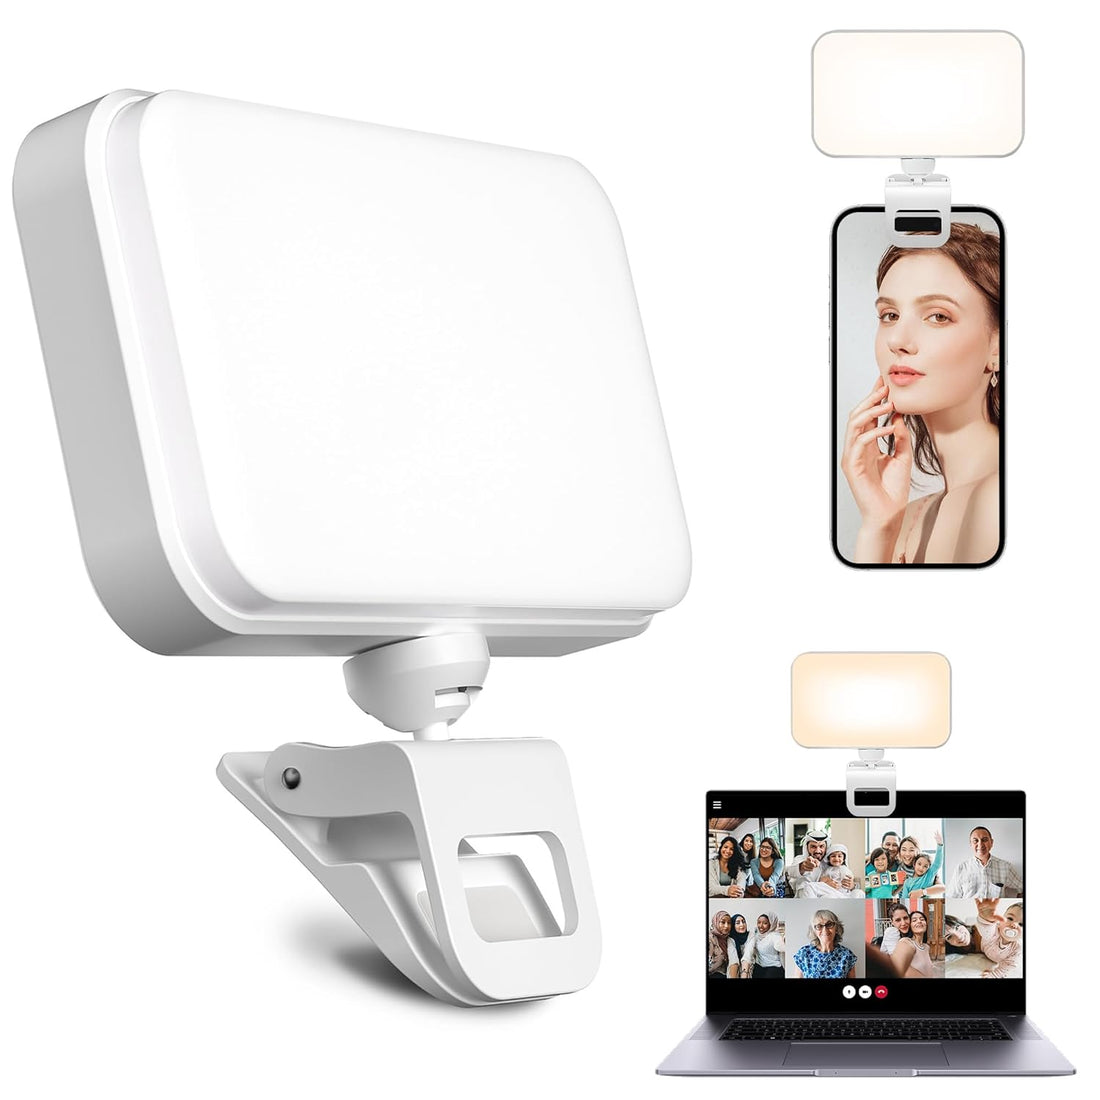 CWZZ High Power Rechargeable Selfie Light with Adjusted 3 Light Modes & 360° Rotatable, Clip Video Light for Phone, Laptop, Tablet, for Makeup, TikTok, Selfie, Vlog, Video Conference